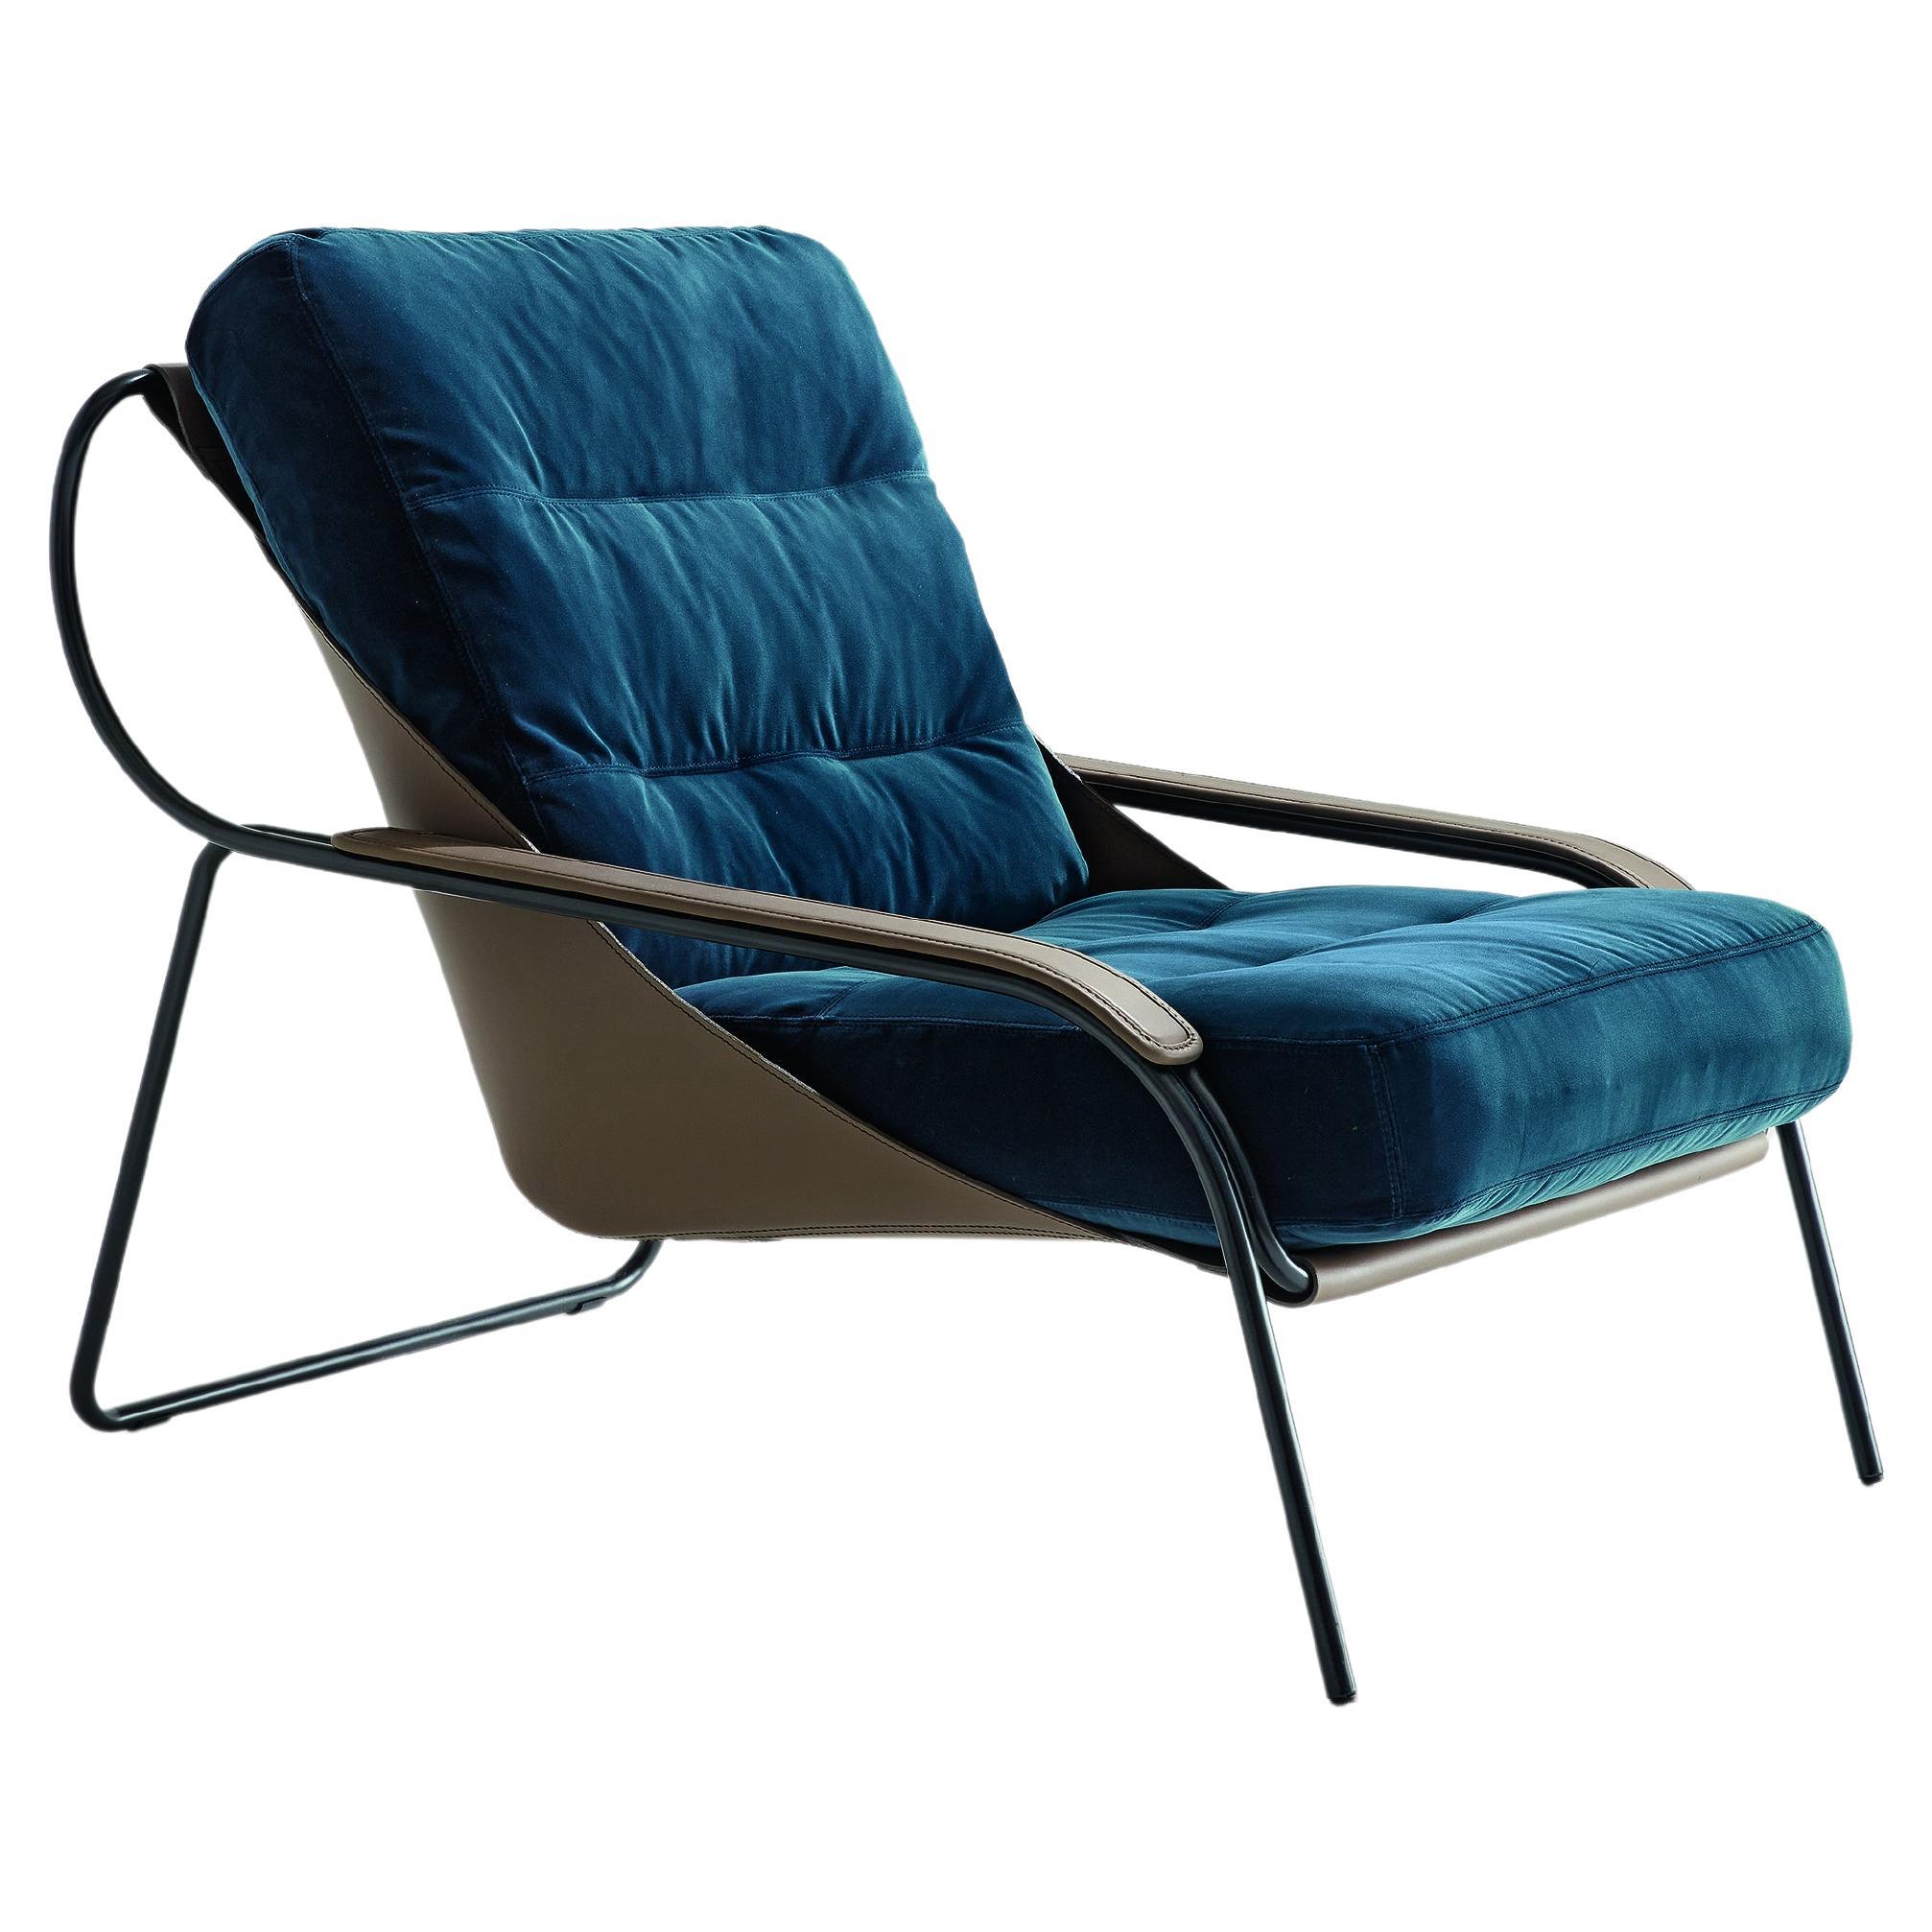 Zanotta Maggiolina Lounge Chair in Top Upholstery with Black Painted Steel Frame